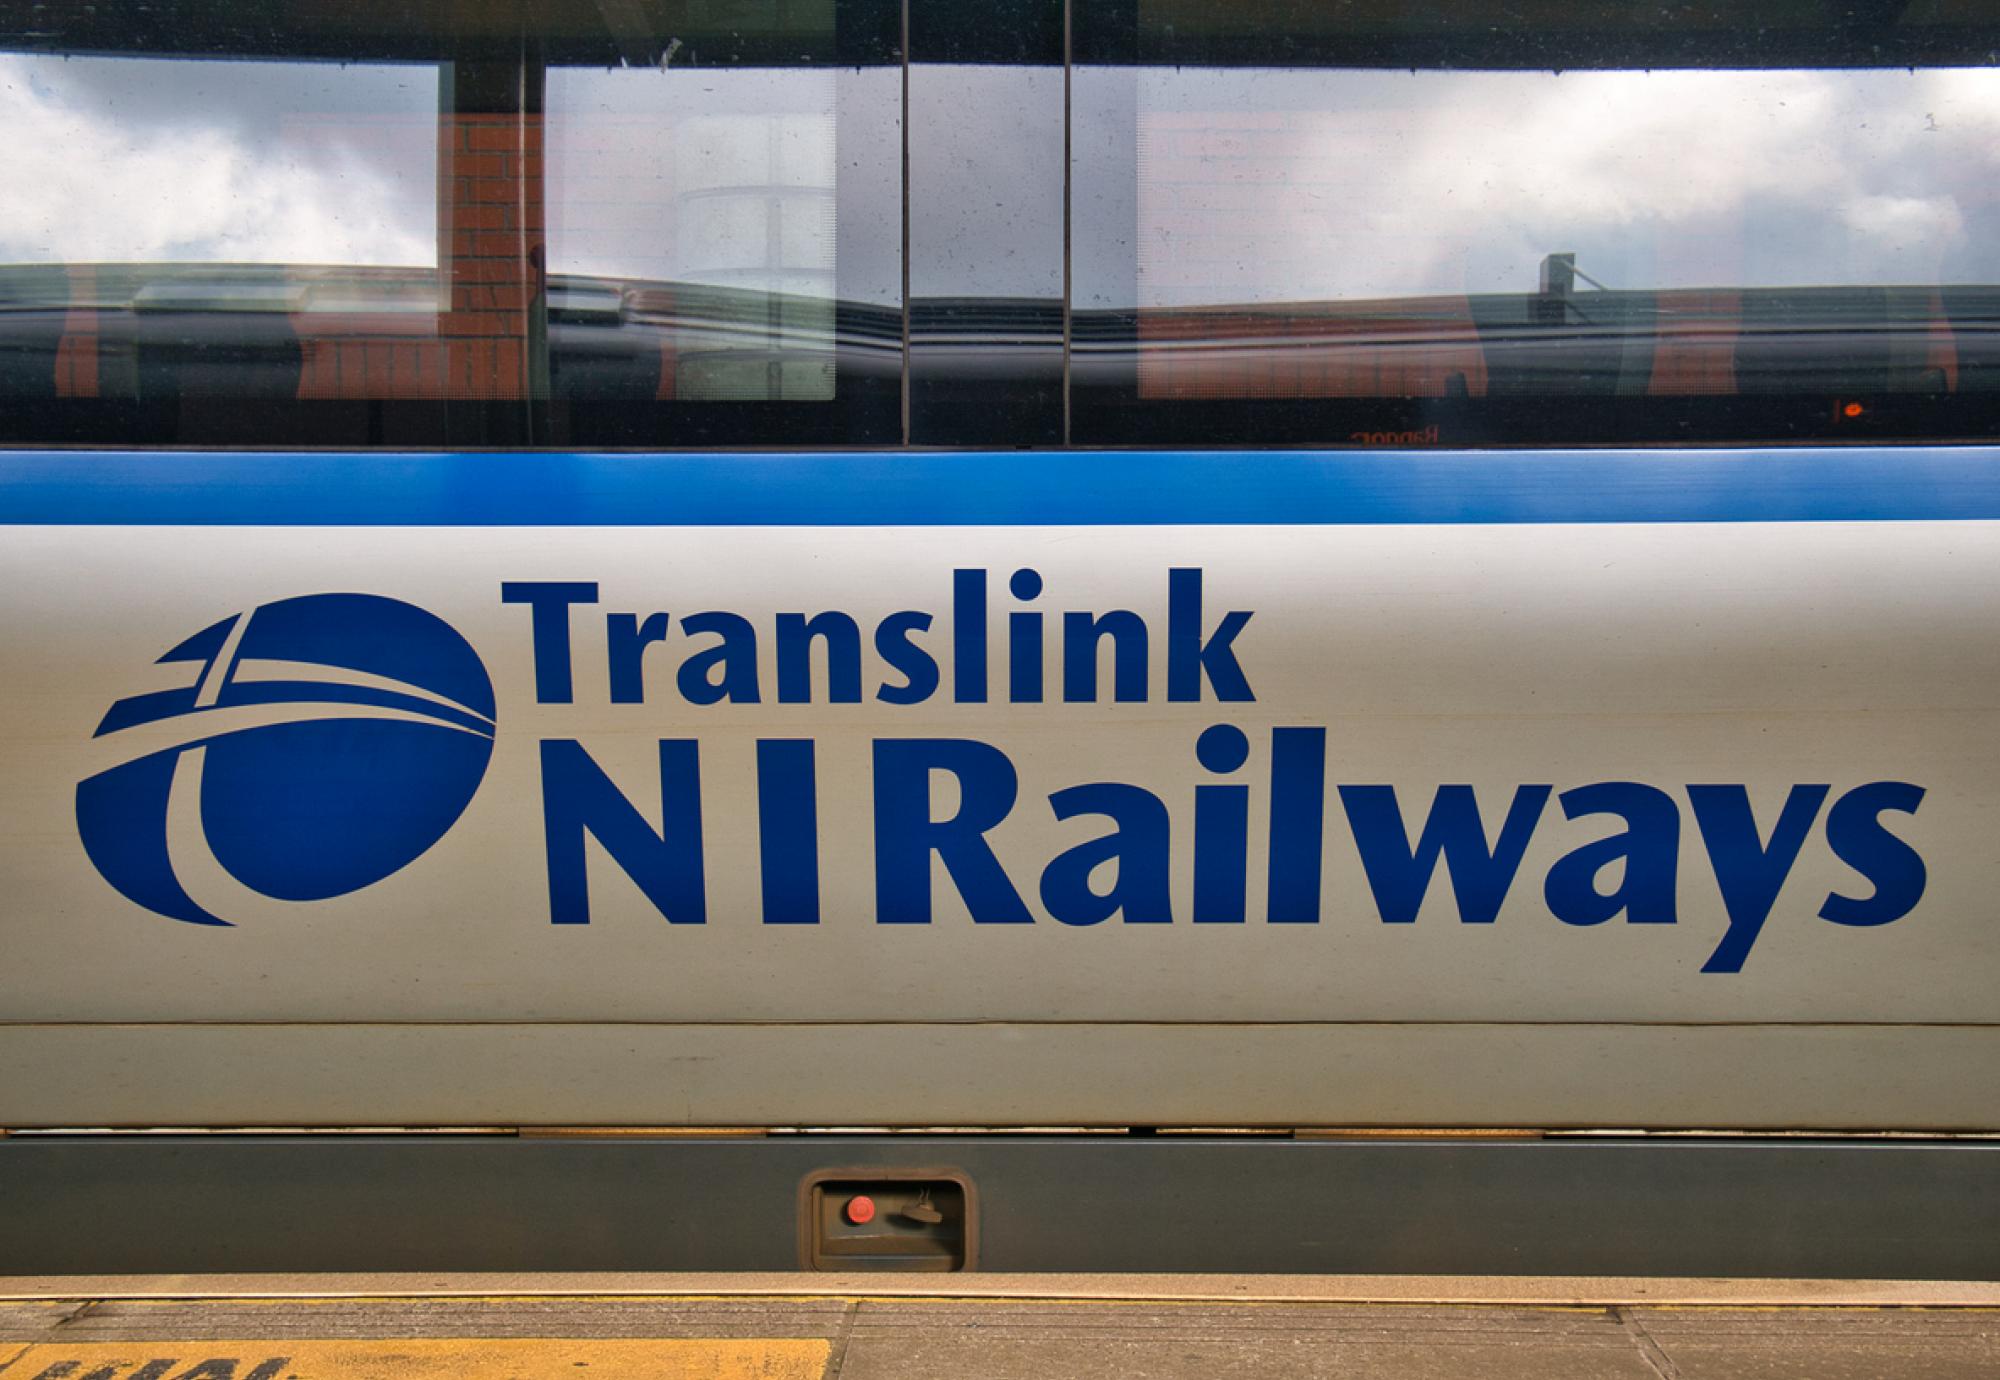 Image of Translink train livery at station